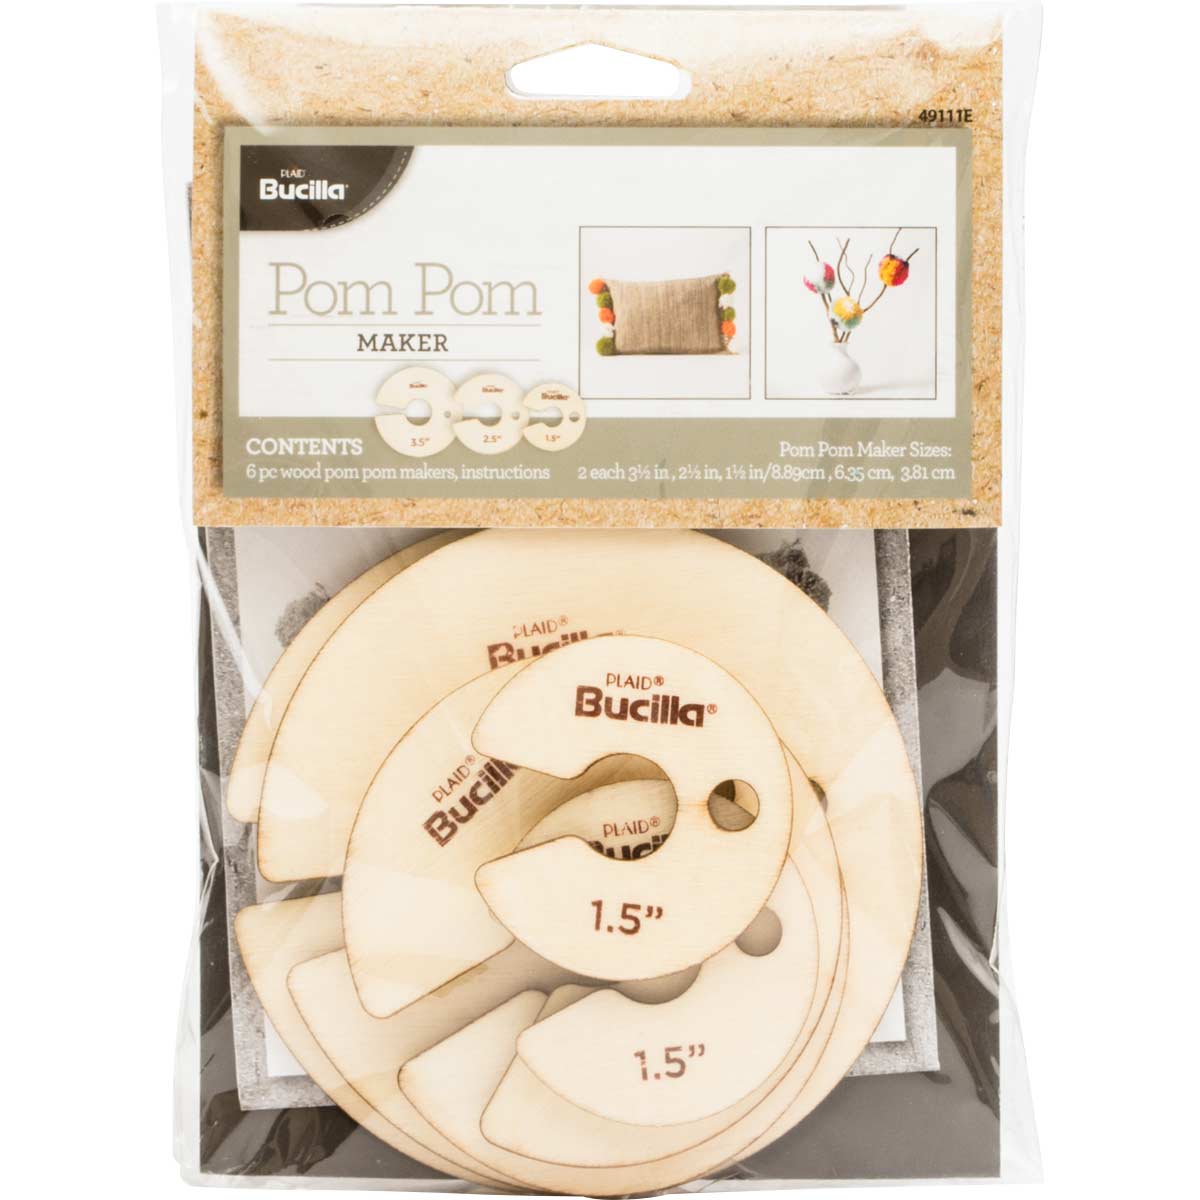 Circle All-In-One 8 pc Bucilla 49109 Weaving Loom Kit